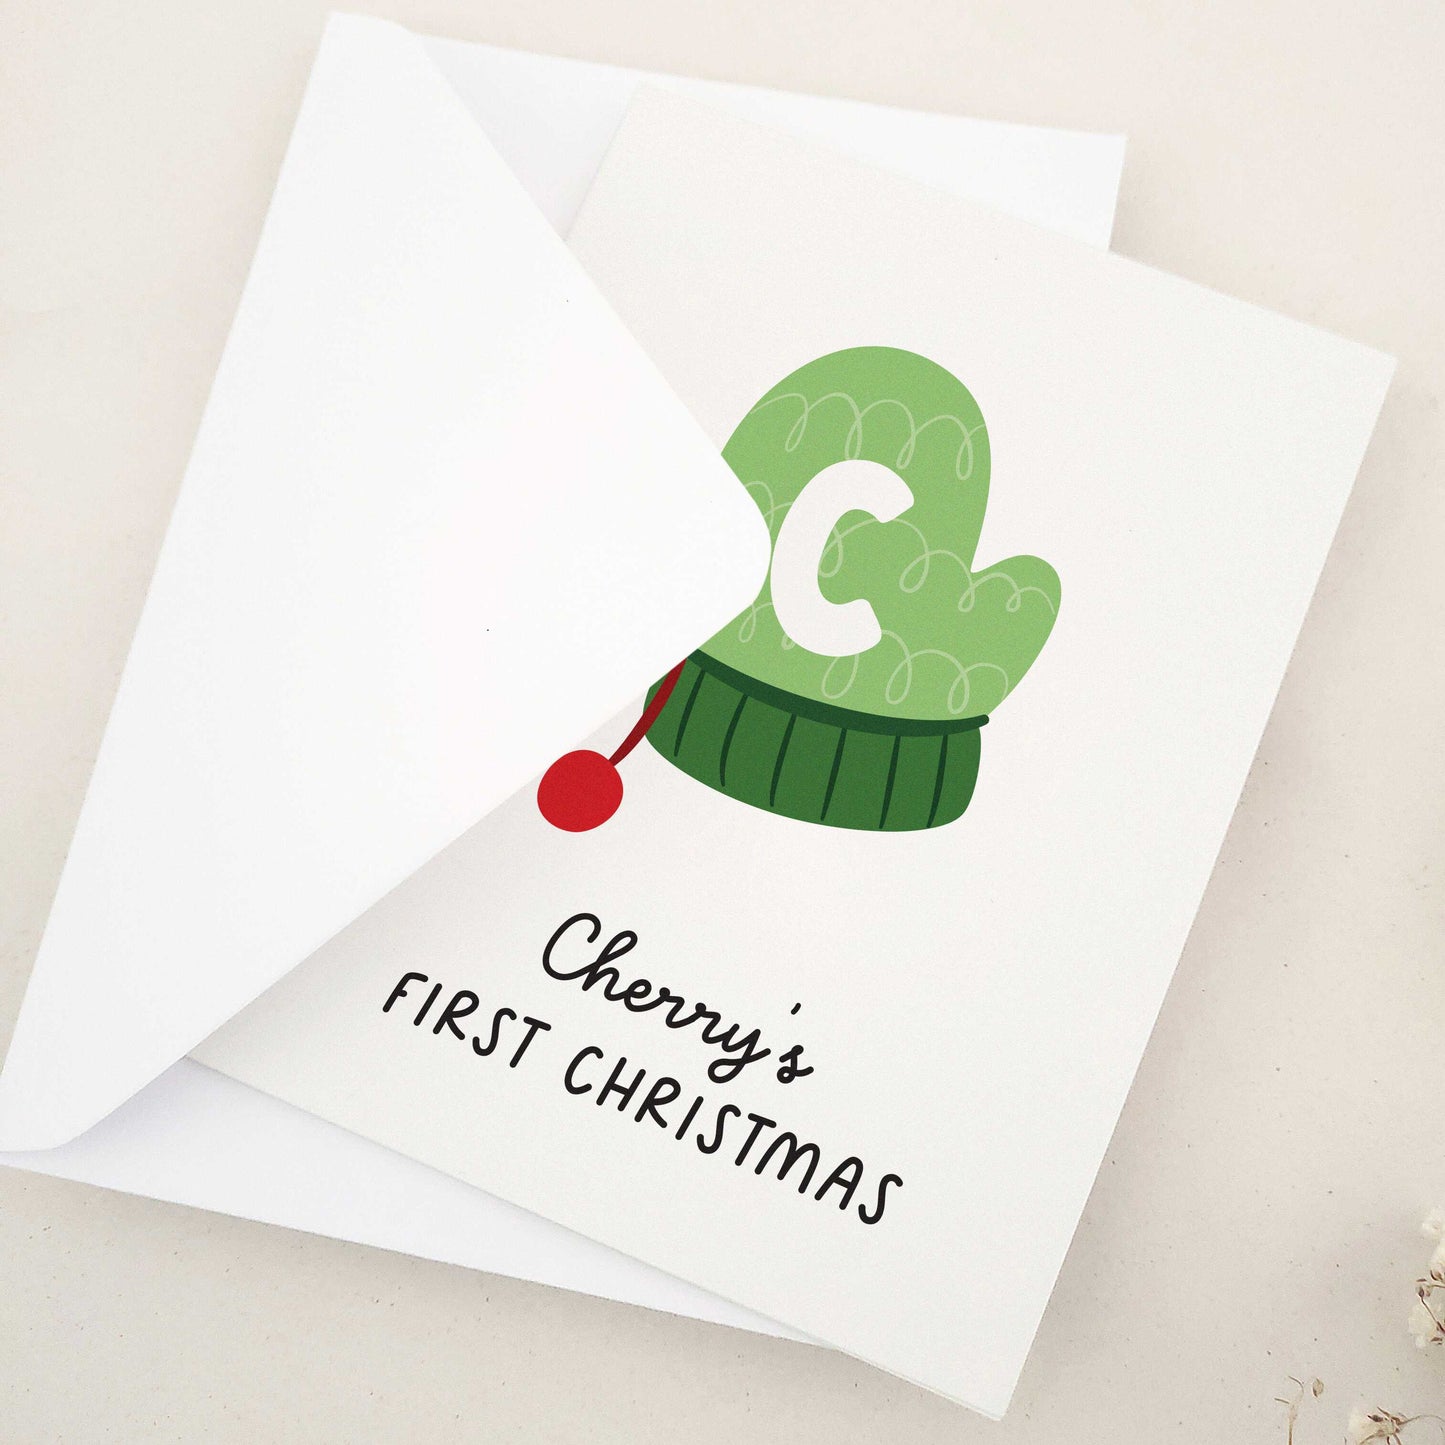 Share the happiness and joy of the season with a heartwarming design featuring a cozy green winter mitten adorned with a playful initial, perfect for marking a little one's introduction to time-honored holiday traditions. This delightful card captures the essence of a child's first experience with the magic of yuletide, making it a cherished keepsake for years to come.